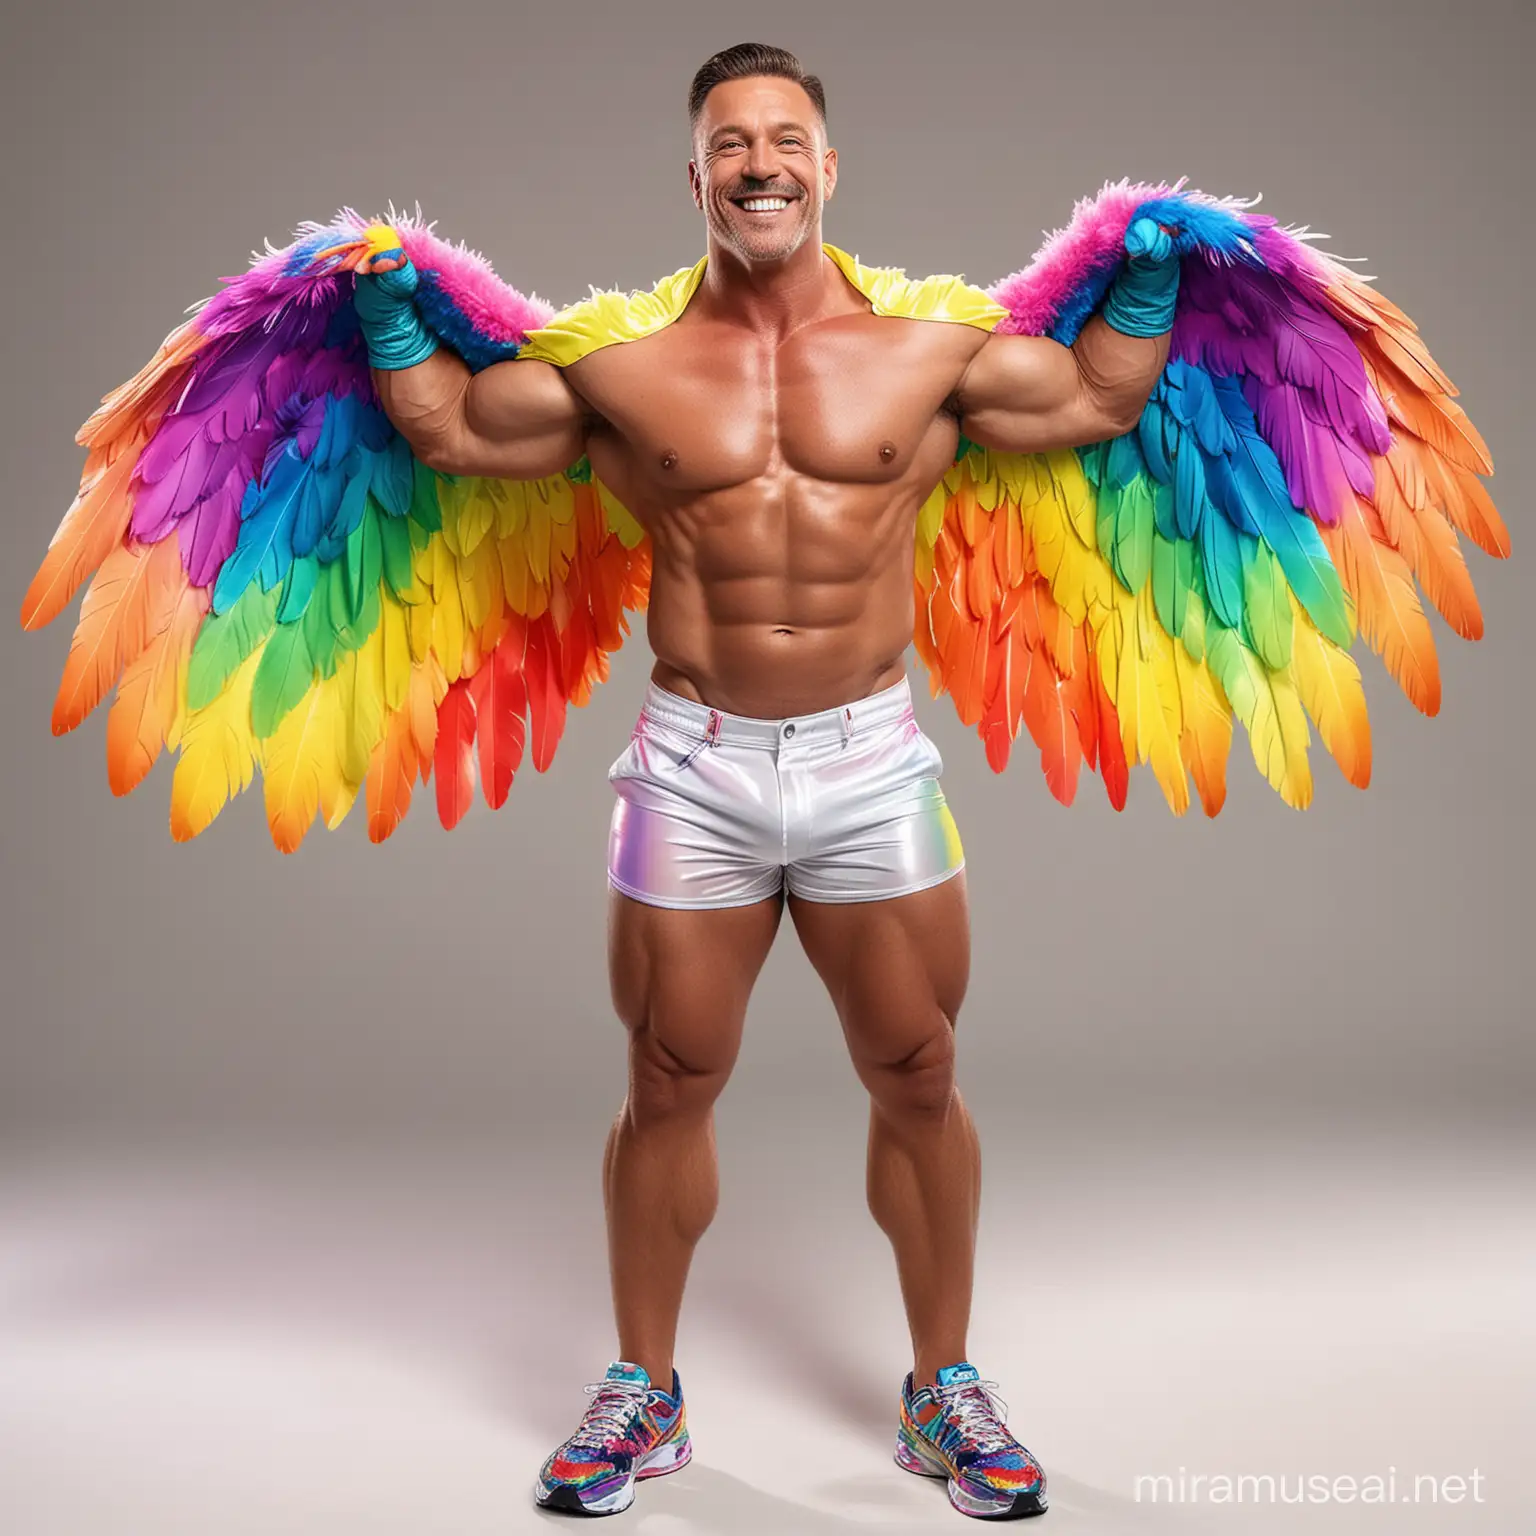 Full Body to feet Topless 40s Ultra Chunky Bodybuilder Daddy with Great Smile wearing Multi-Highlighter Bright Rainbow with white Coloured See Through Eagle Wings Shoulder Jacket Short shorts left arm up Flexing